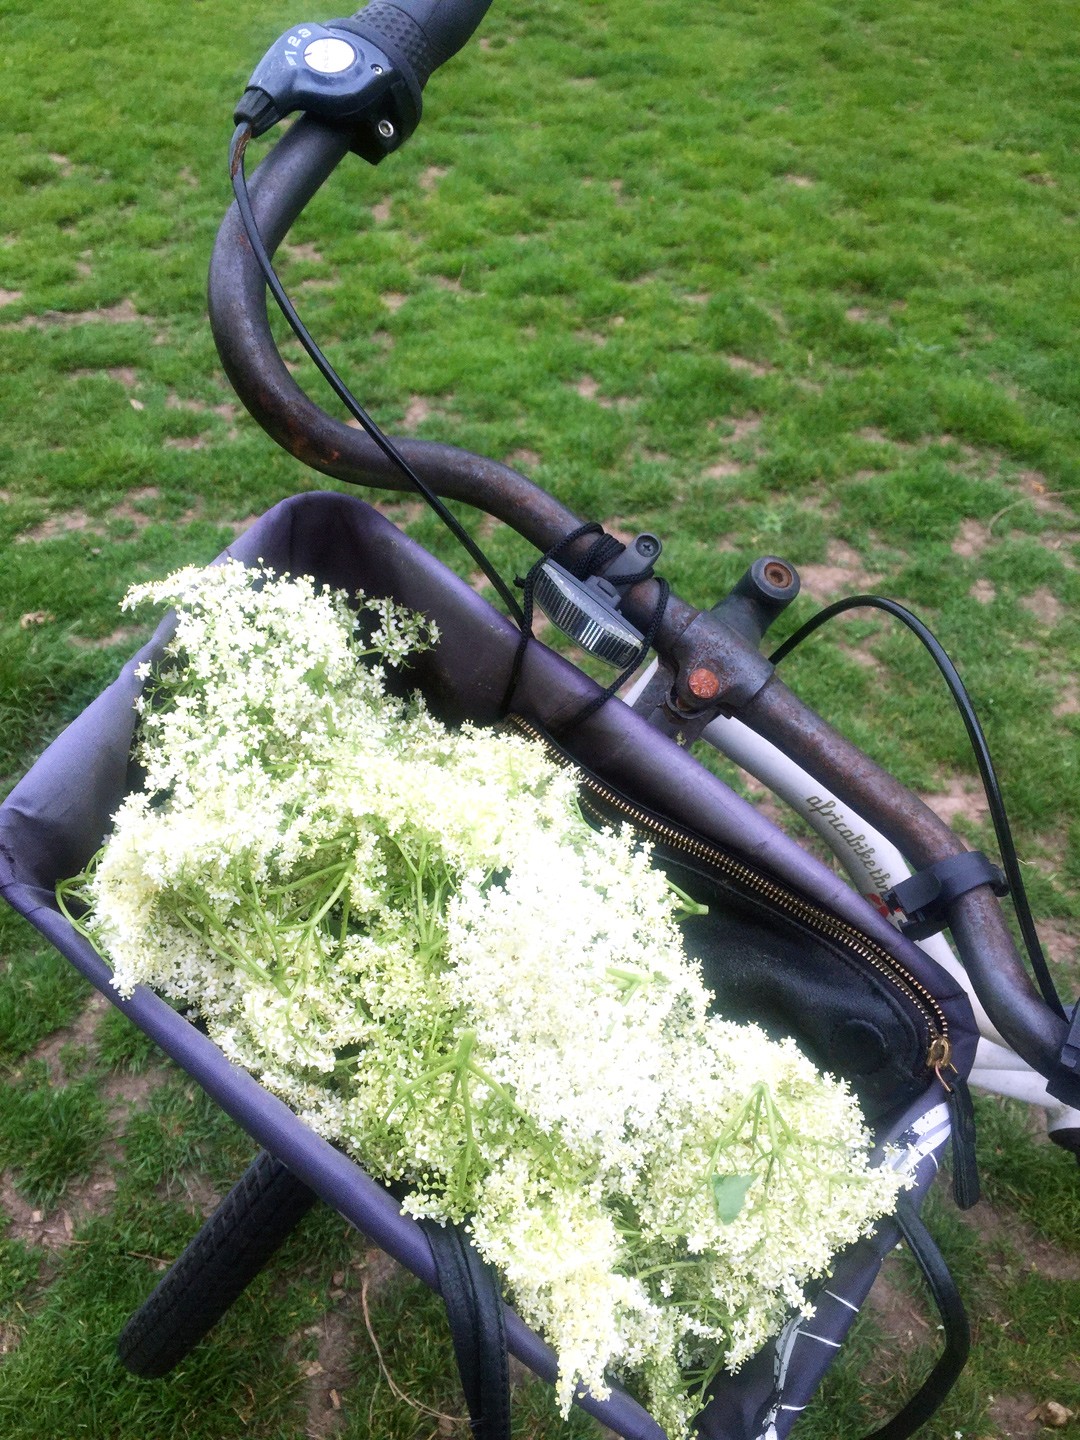 The elderflower tree took us by surprise without my tote bag, so the basket did the job just fine! Homeward bound to get started on making our own elderflower cordial! Make your own with these simple steps: https://www.chalkandmoss.com/how-to-make-elderflower-cordial-easy-refreshing-summer-in-a-bottle/